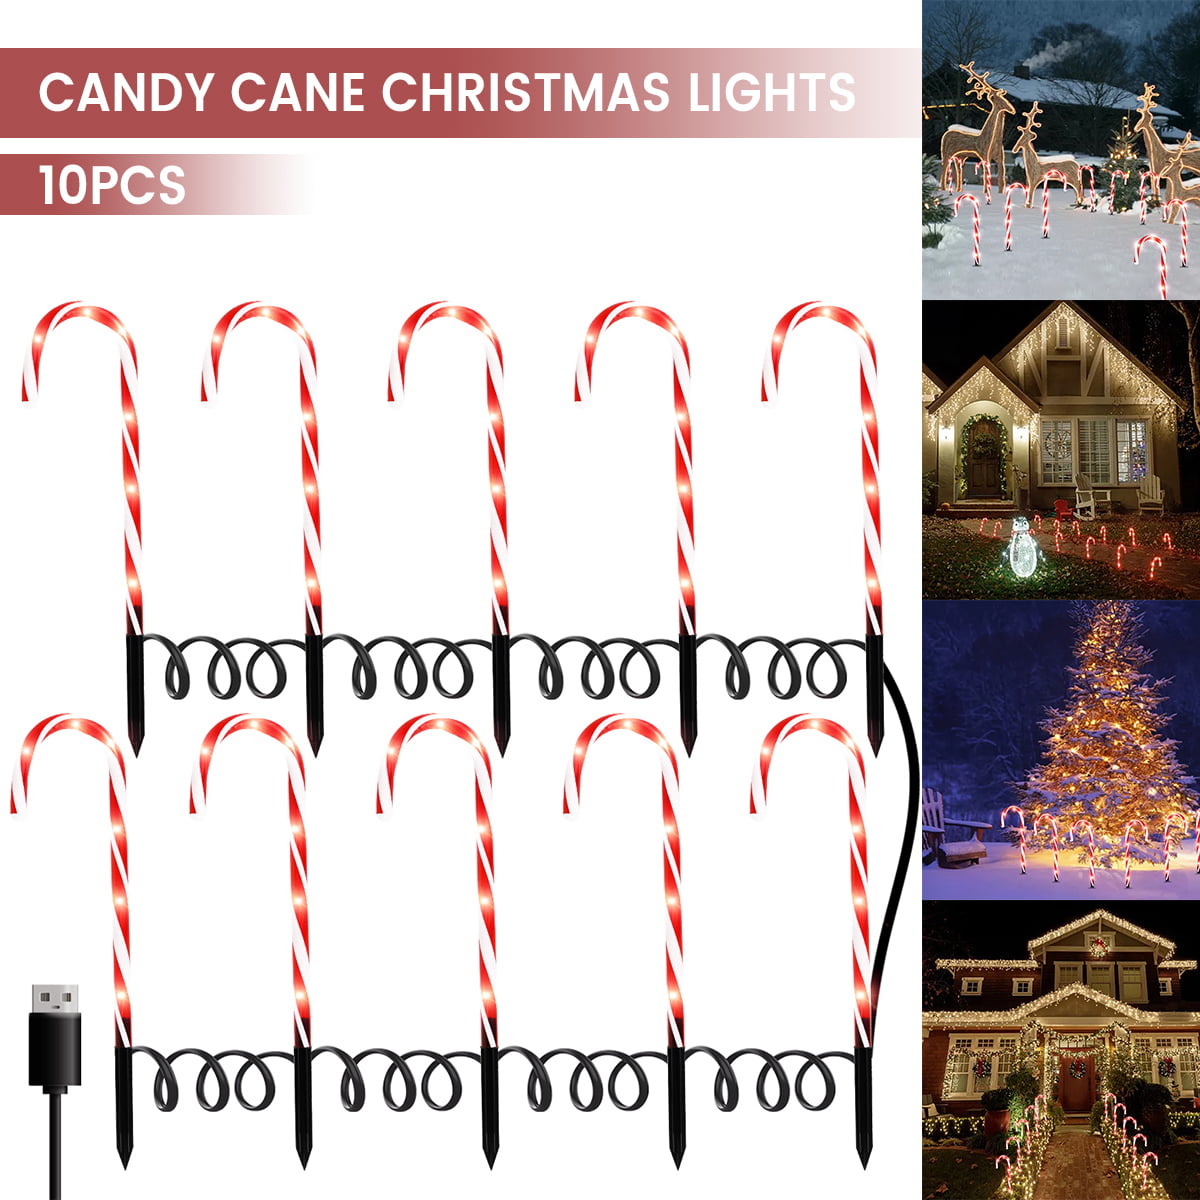 Details about   10Pcs Christmas Candy Cane Pathway Marker Lights Yard Lawn Pathway Outdoor Decor 